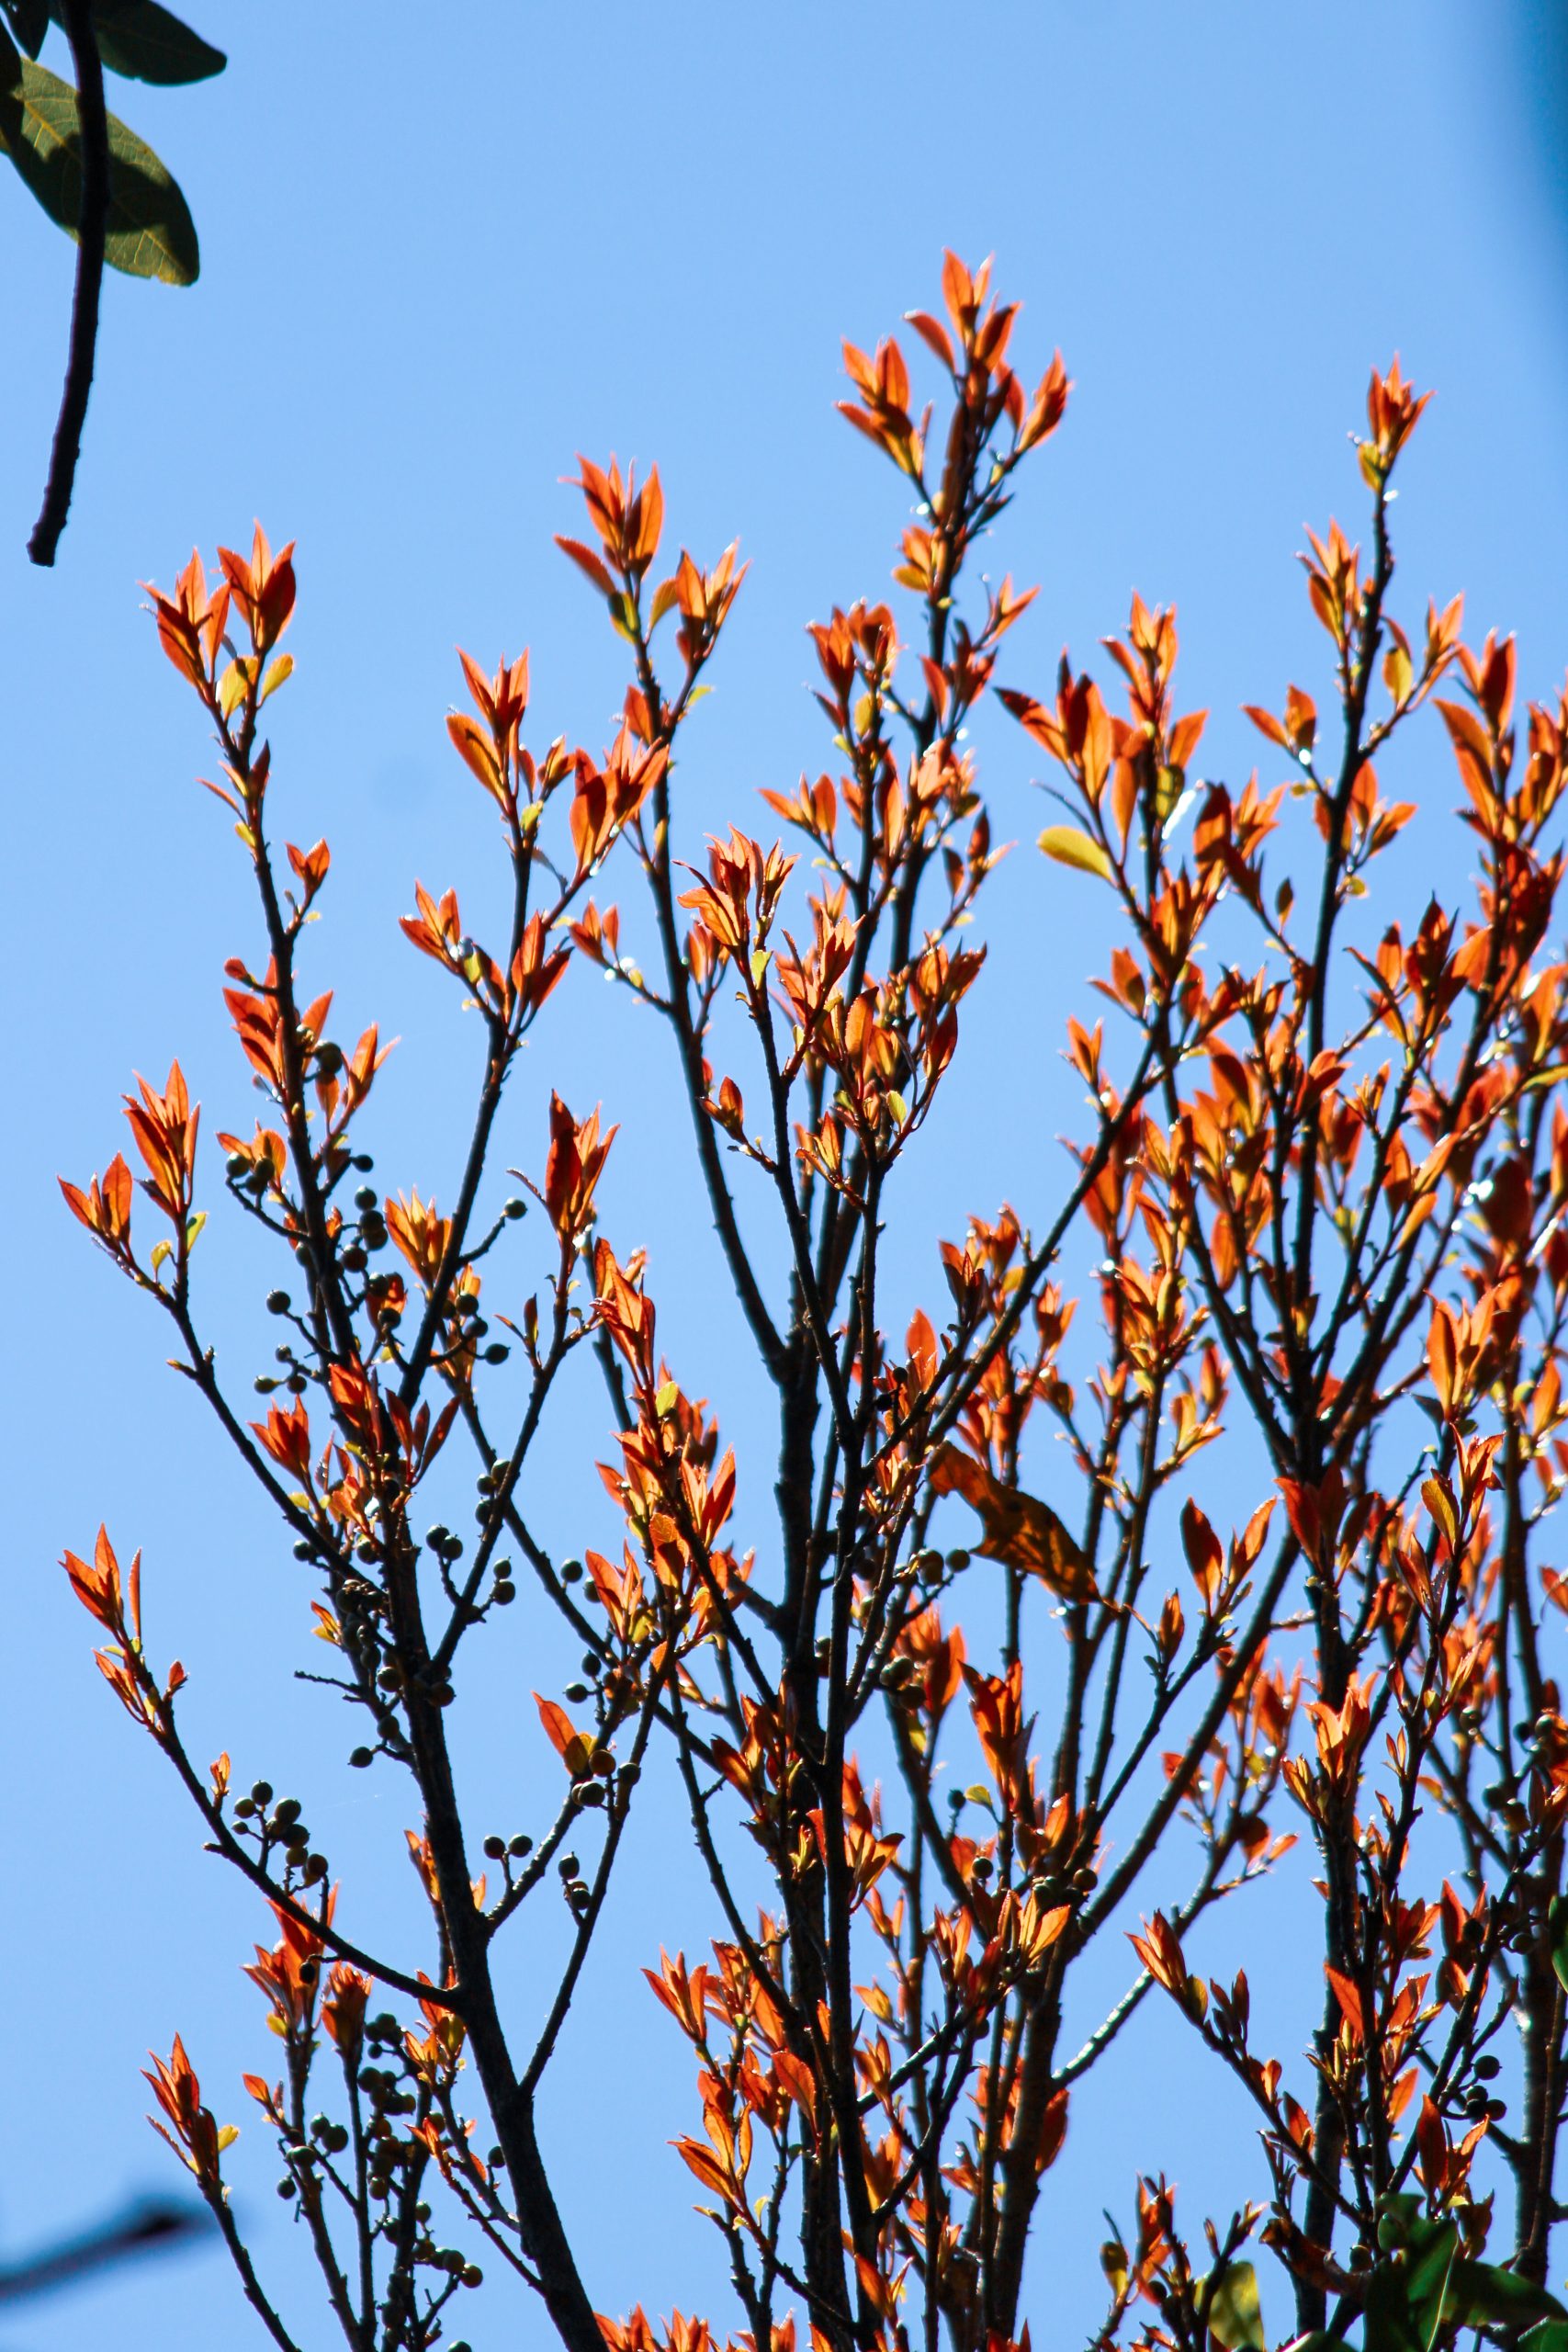 New leaves on tree branches